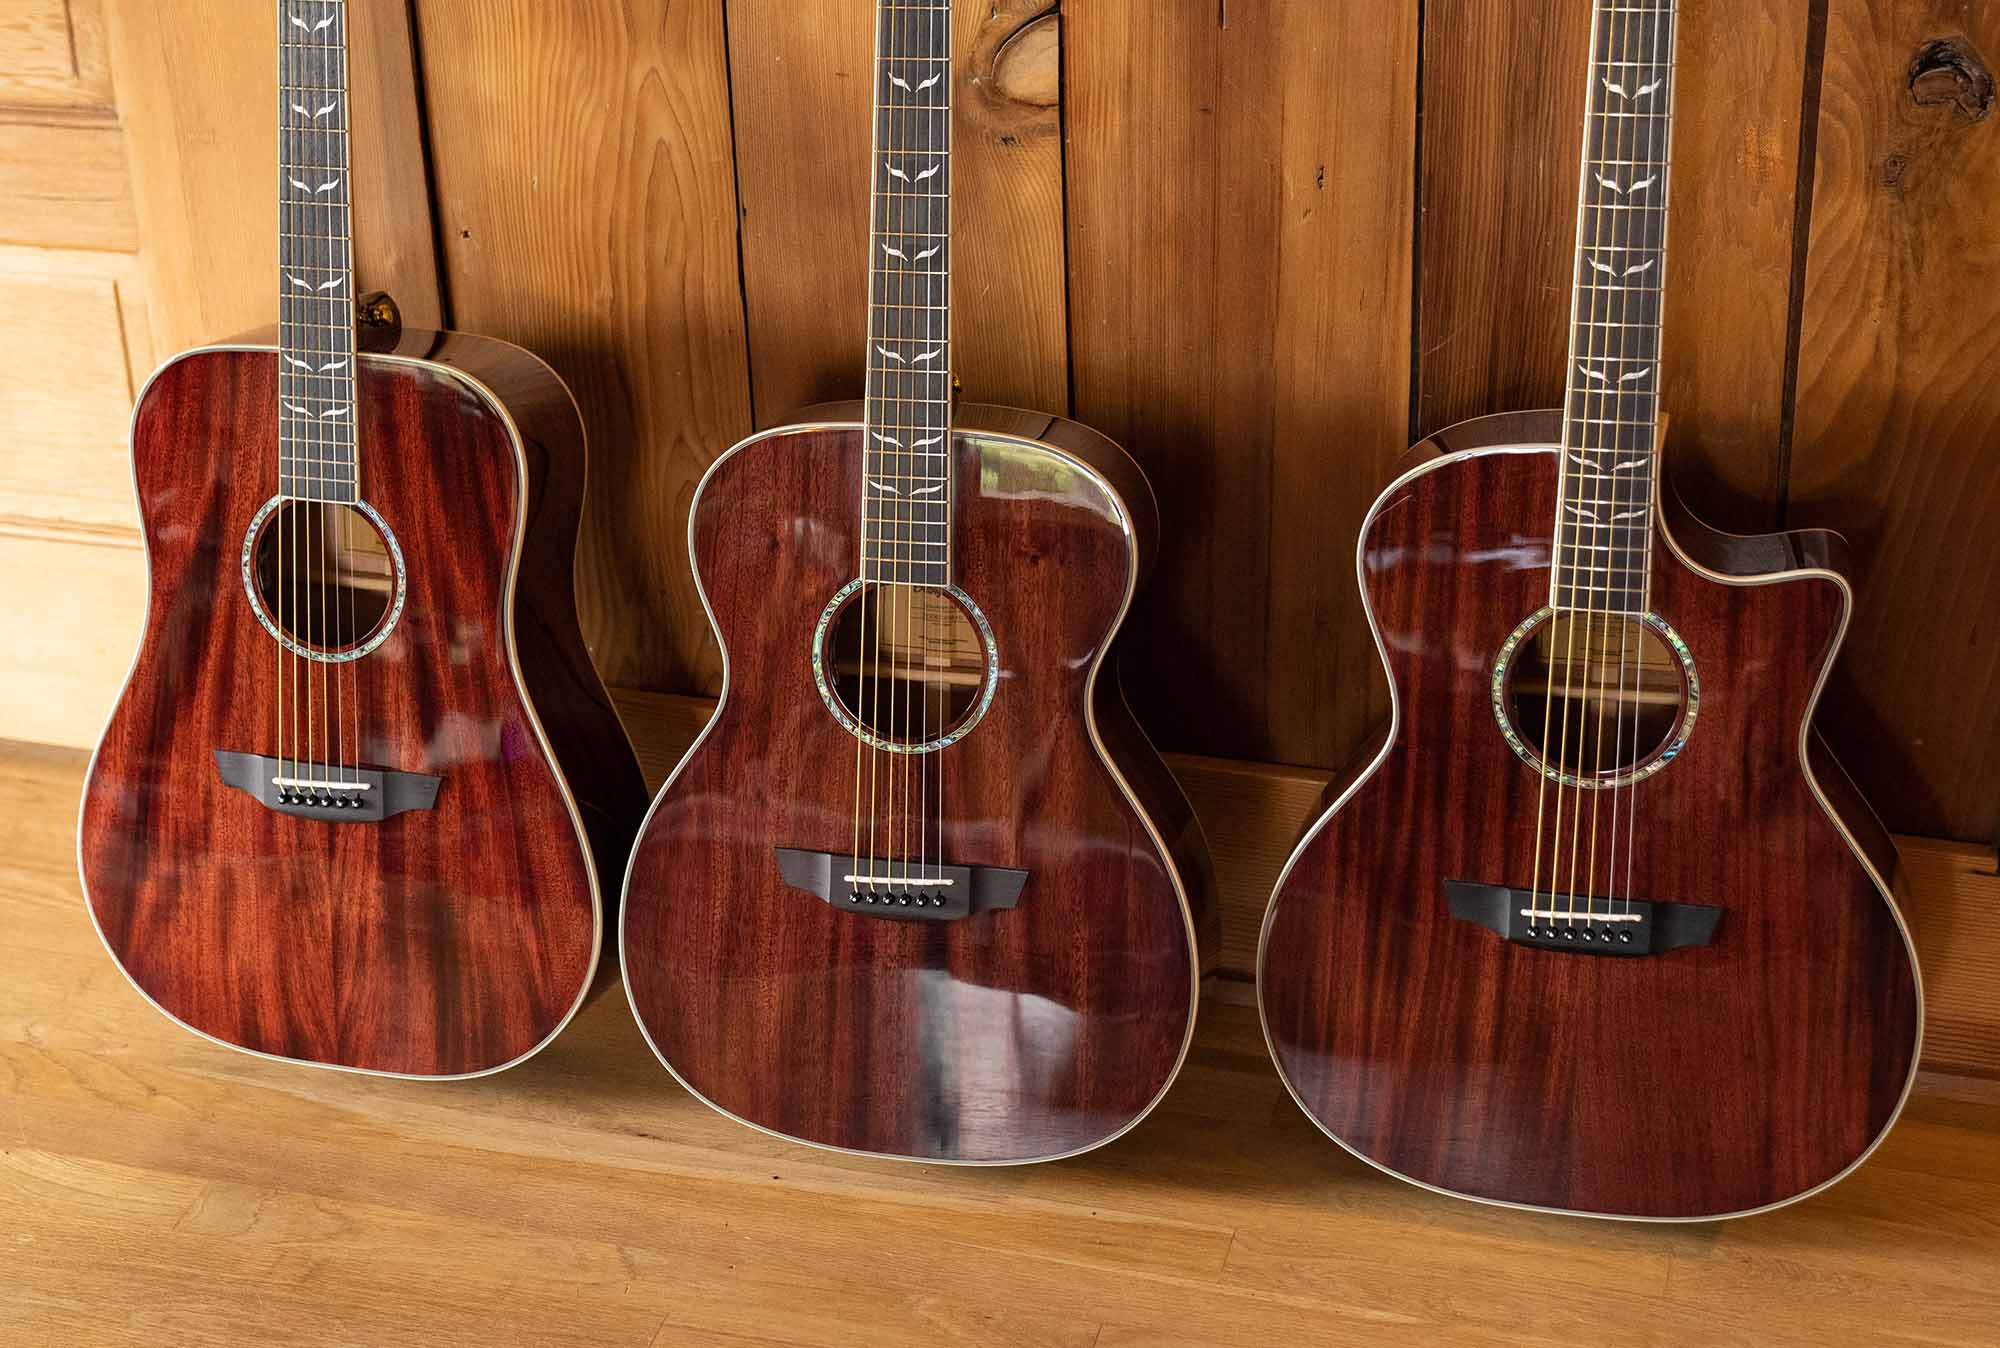 Three solid top mahogany guitars with natural gloss finish in a wood cabin